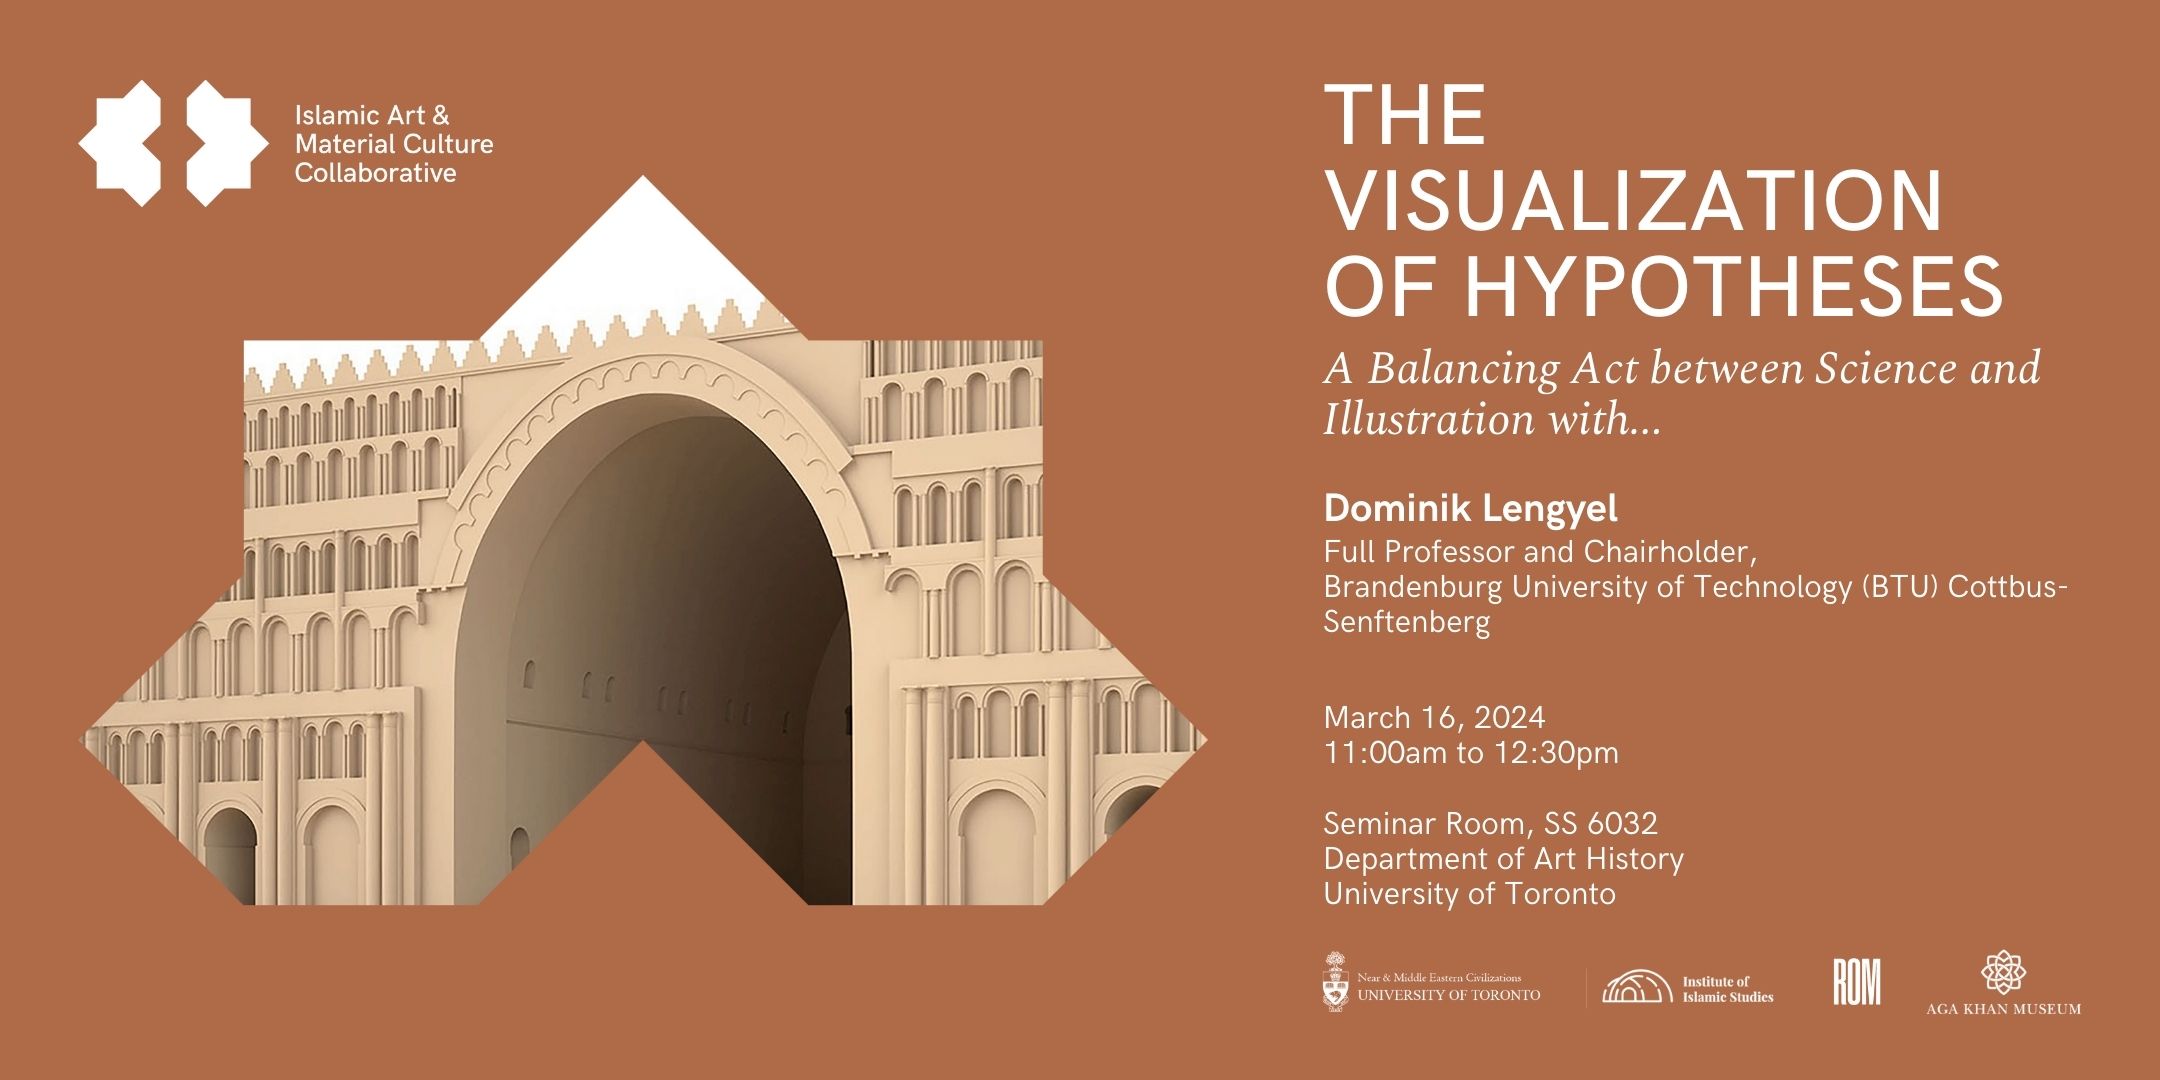 [Mar 16, 2024] The Visualisation of Hypotheses as a Balancing Act between Science and Illustration: A Talk by Prof. Dominik Lengyel